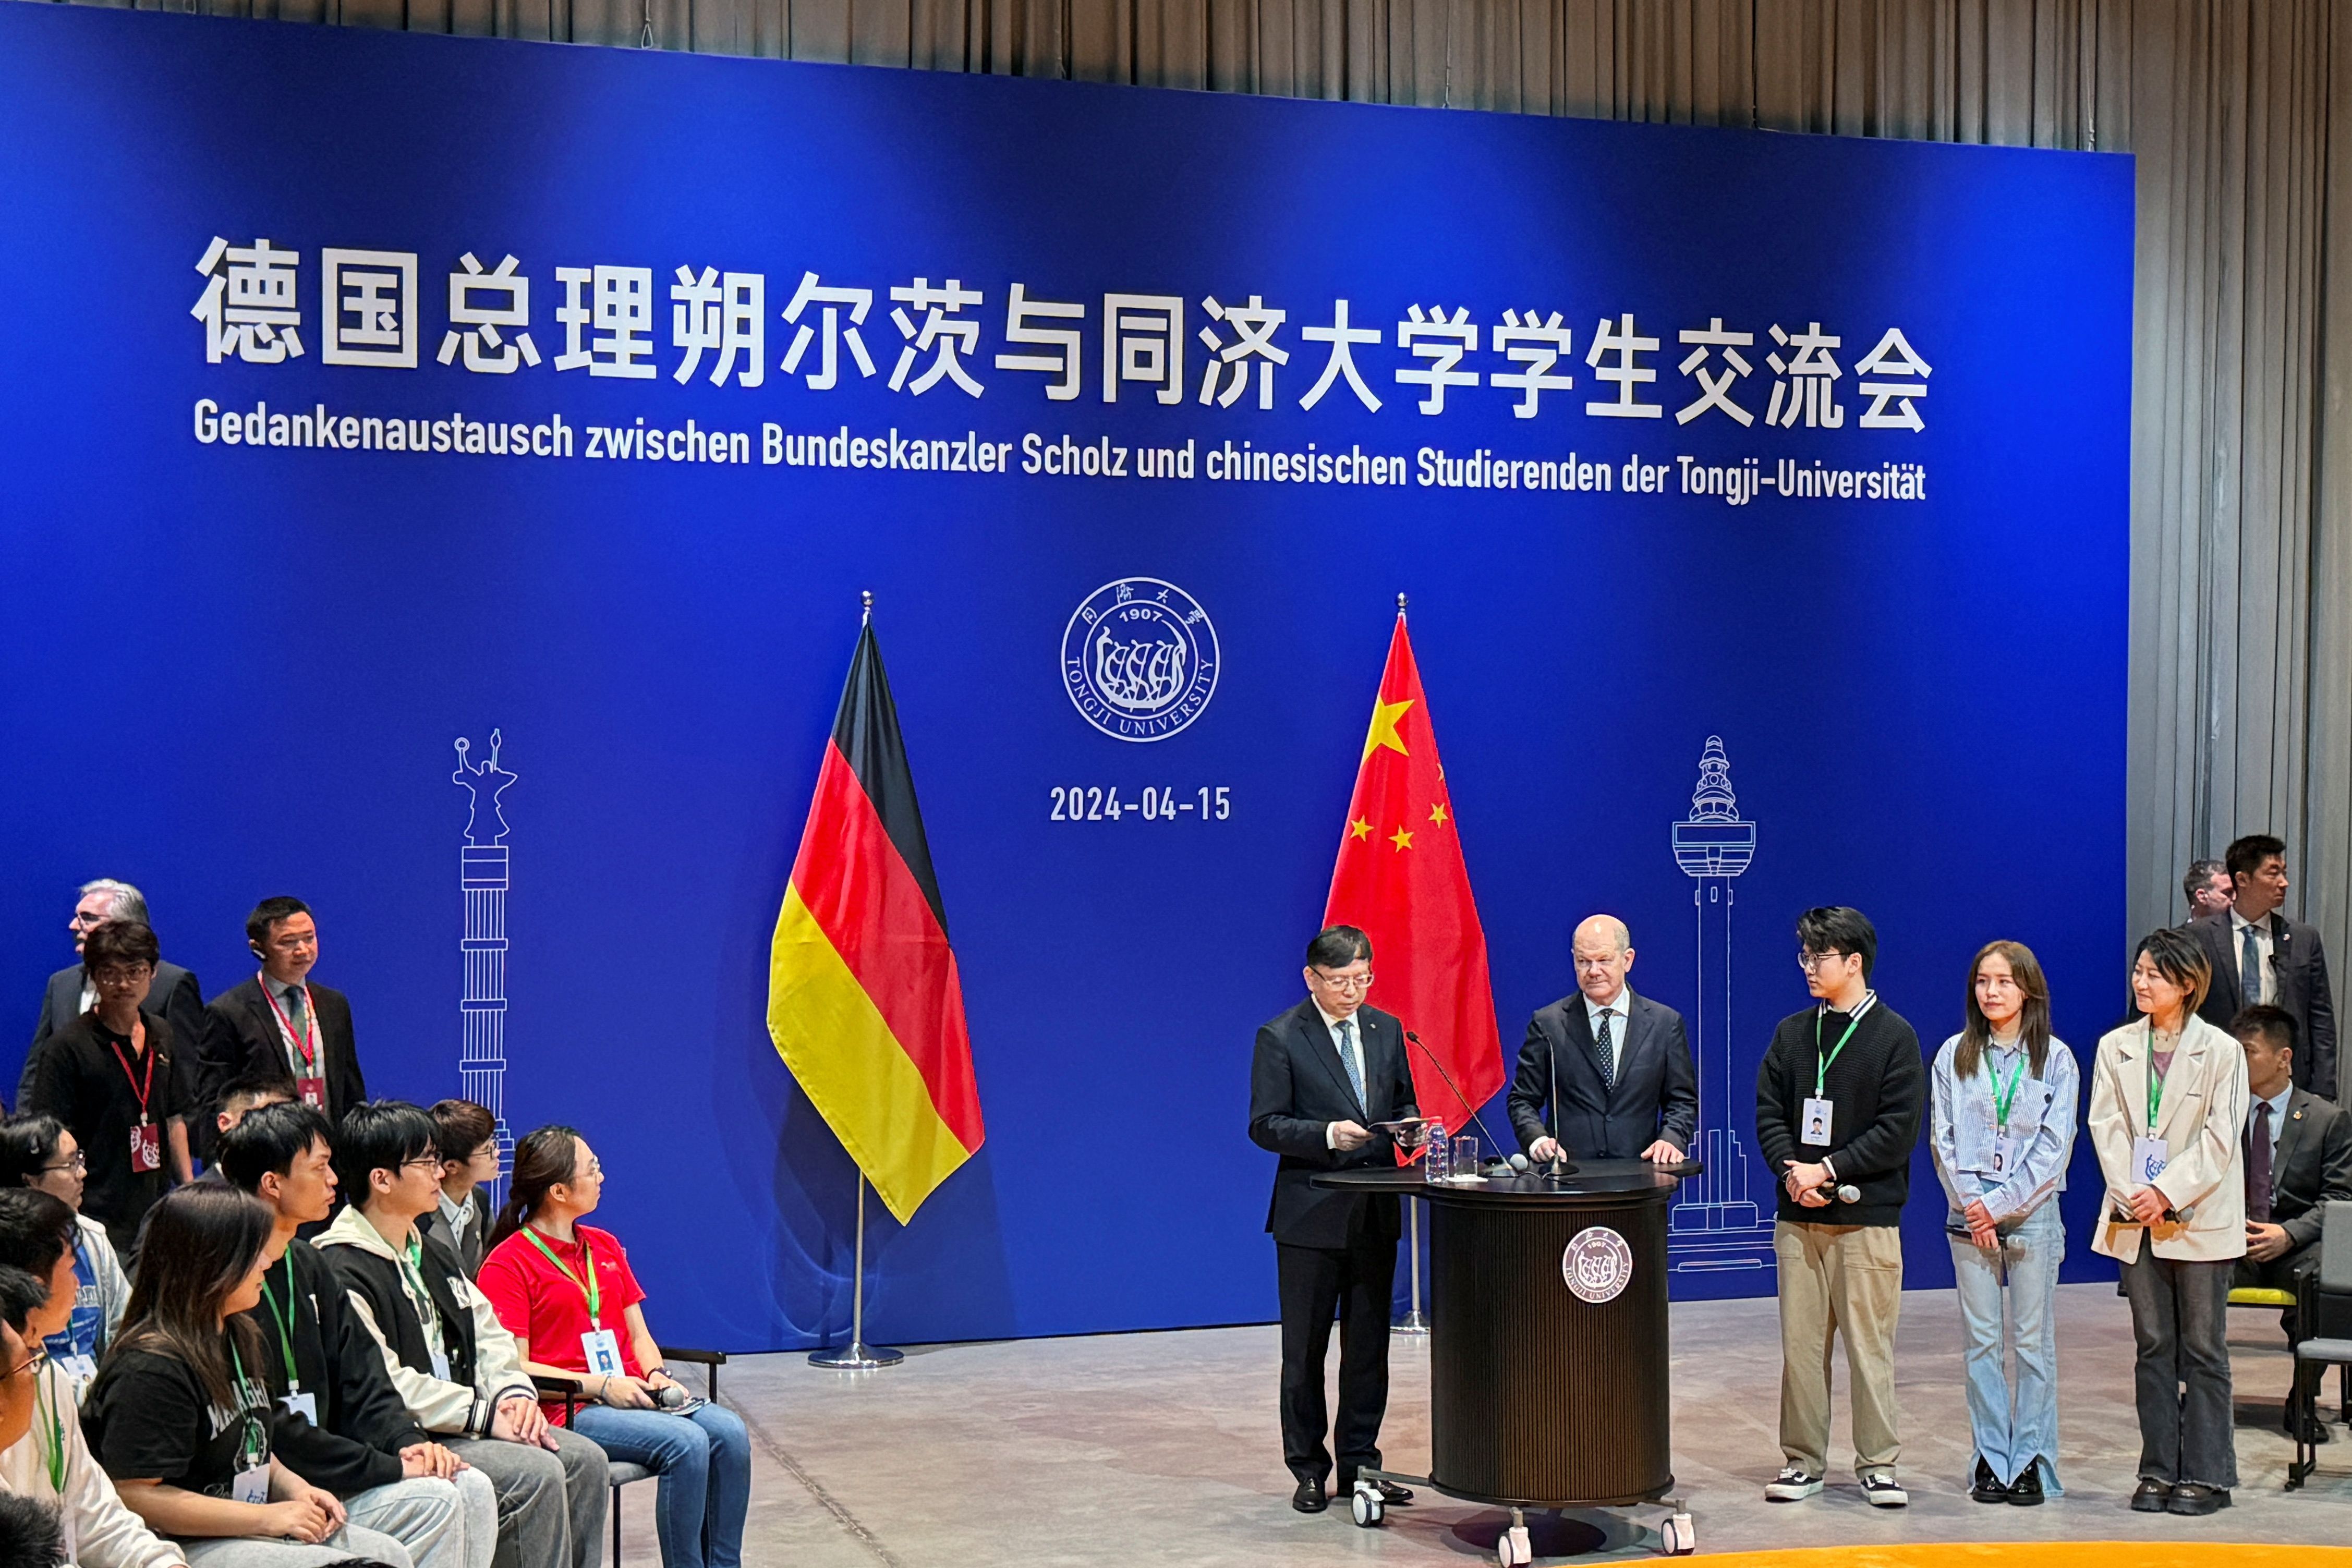 We don't all smoke weed in Germany, Scholz assures Chinese students |  Reuters